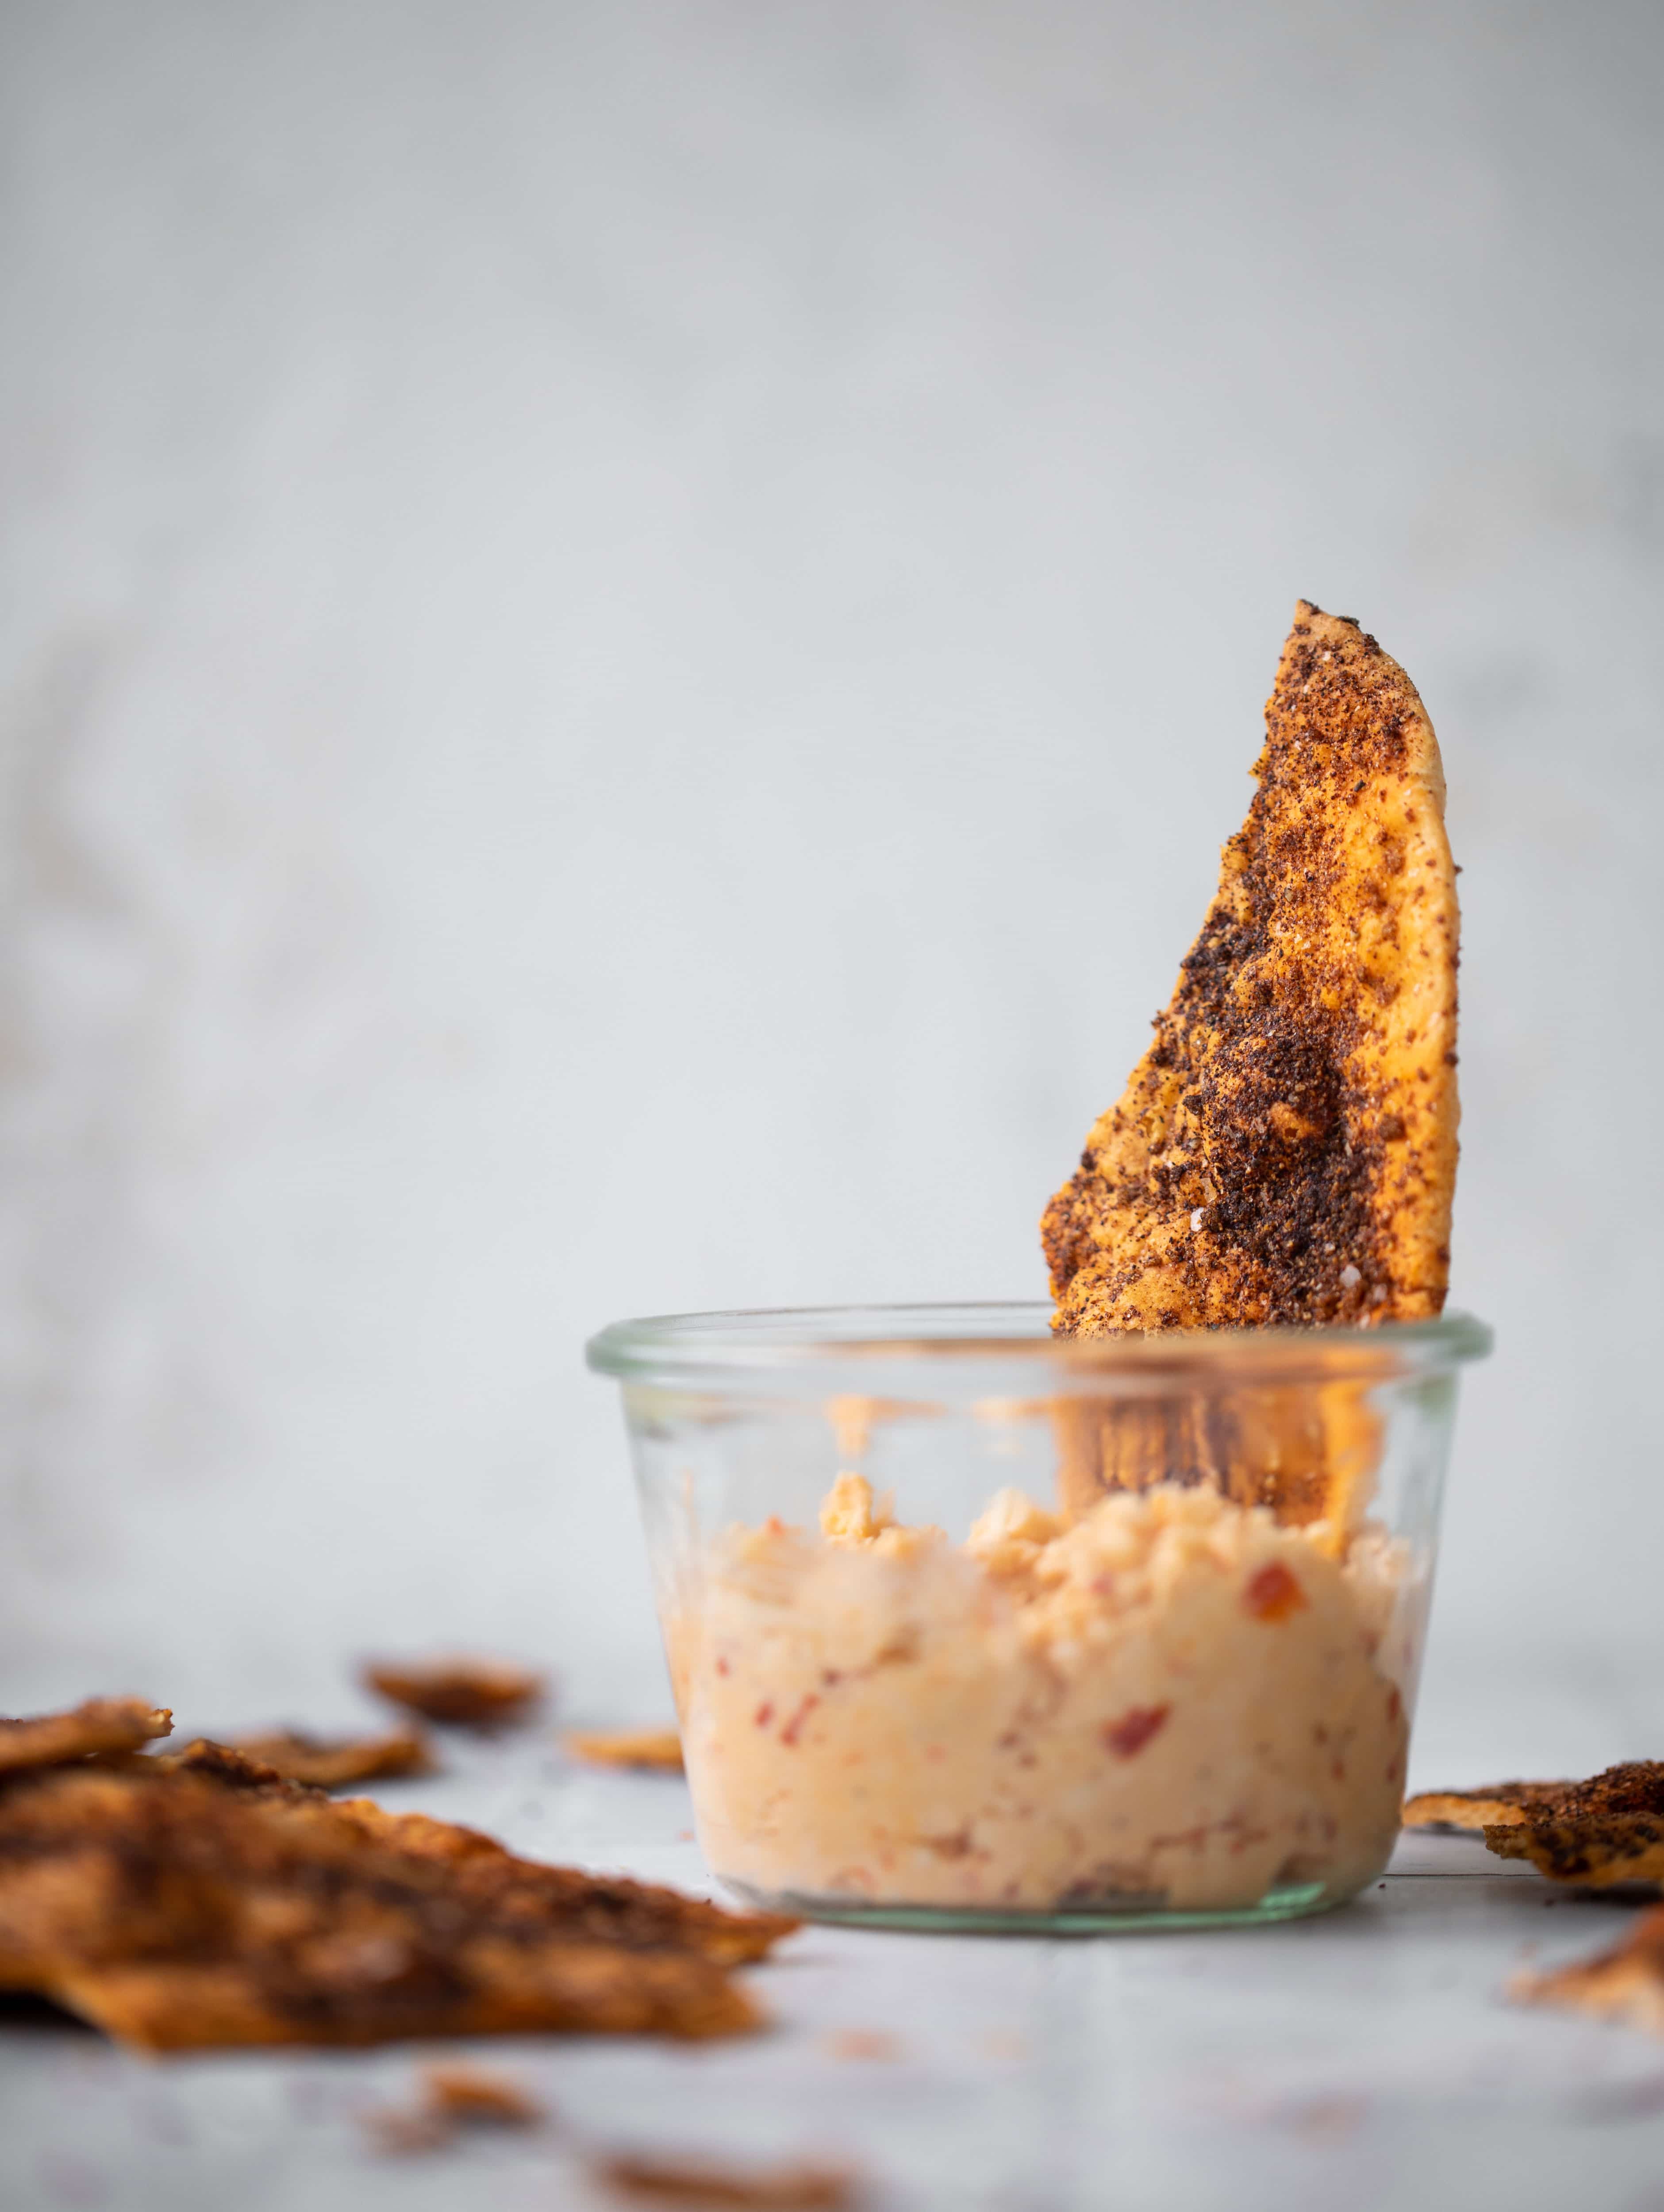 These sourdough crackers are made with sourdough starter discard and super easy! Use your favorite seasonings or spices to make these taste delish.